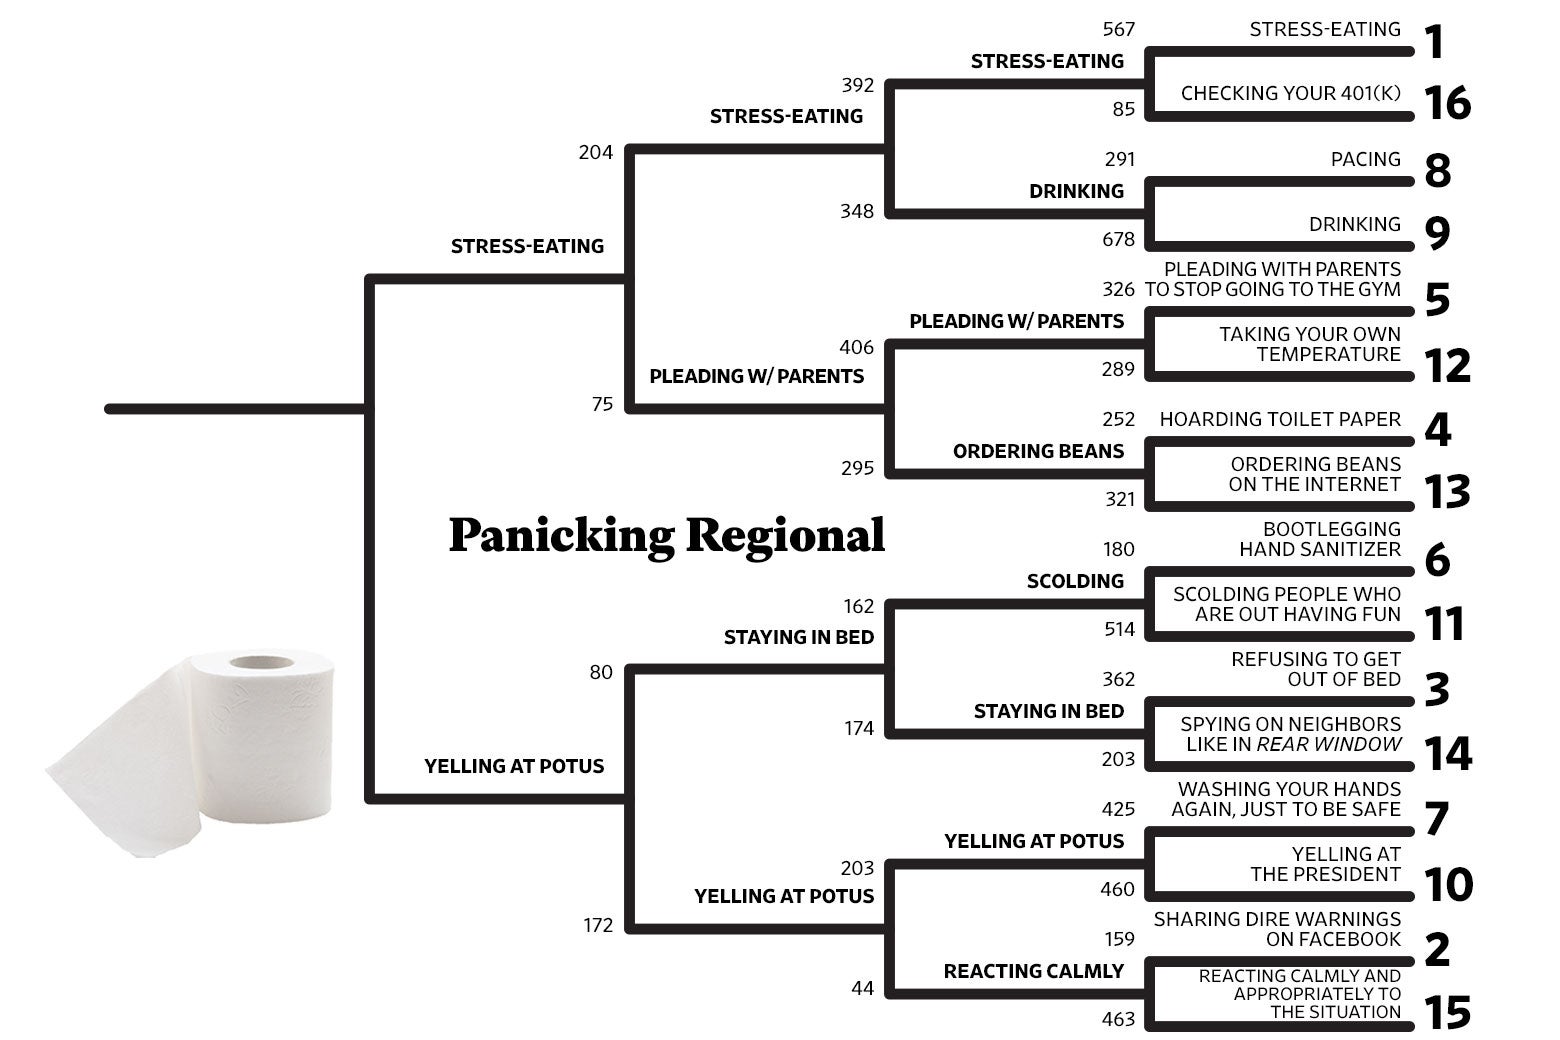 The Panicking Regional of The National Championship of Social Distancing bracket.